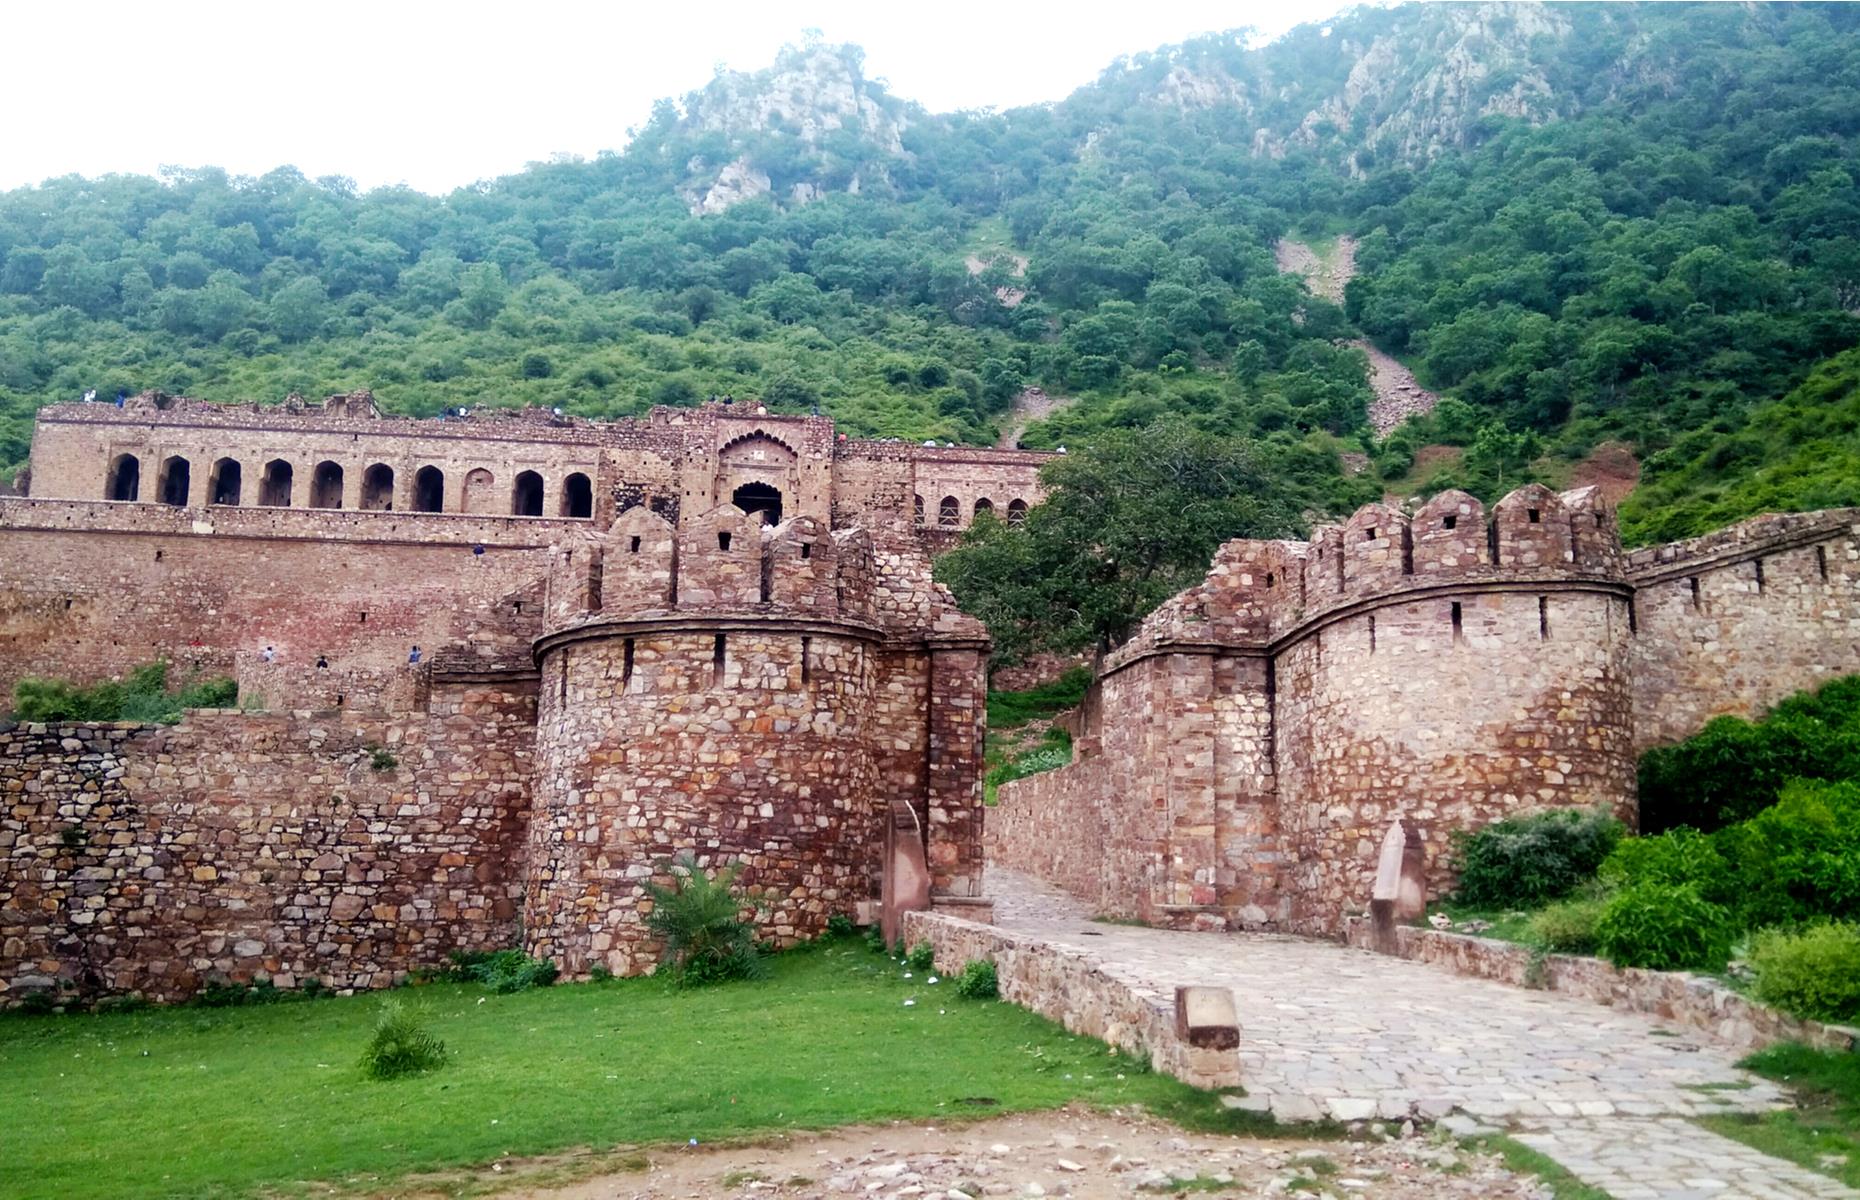 <p>Dubbed the most haunted place in India, 17th-century Bhangarh Fort is shrouded in legend. The most famous story involves a jilted wizard who fell in love with a local princess. Not able to win her affections, the wizard attempted to slip the princess a love potion. However, she saw through his cunning plan and flung the magic brew at a nearby boulder, which dislodged and crushed the ill-fated wizard. It's said the embittered wizard used his last breath to place a curse on the fort, which is now so feared that entry is prohibited after sunset.</p>